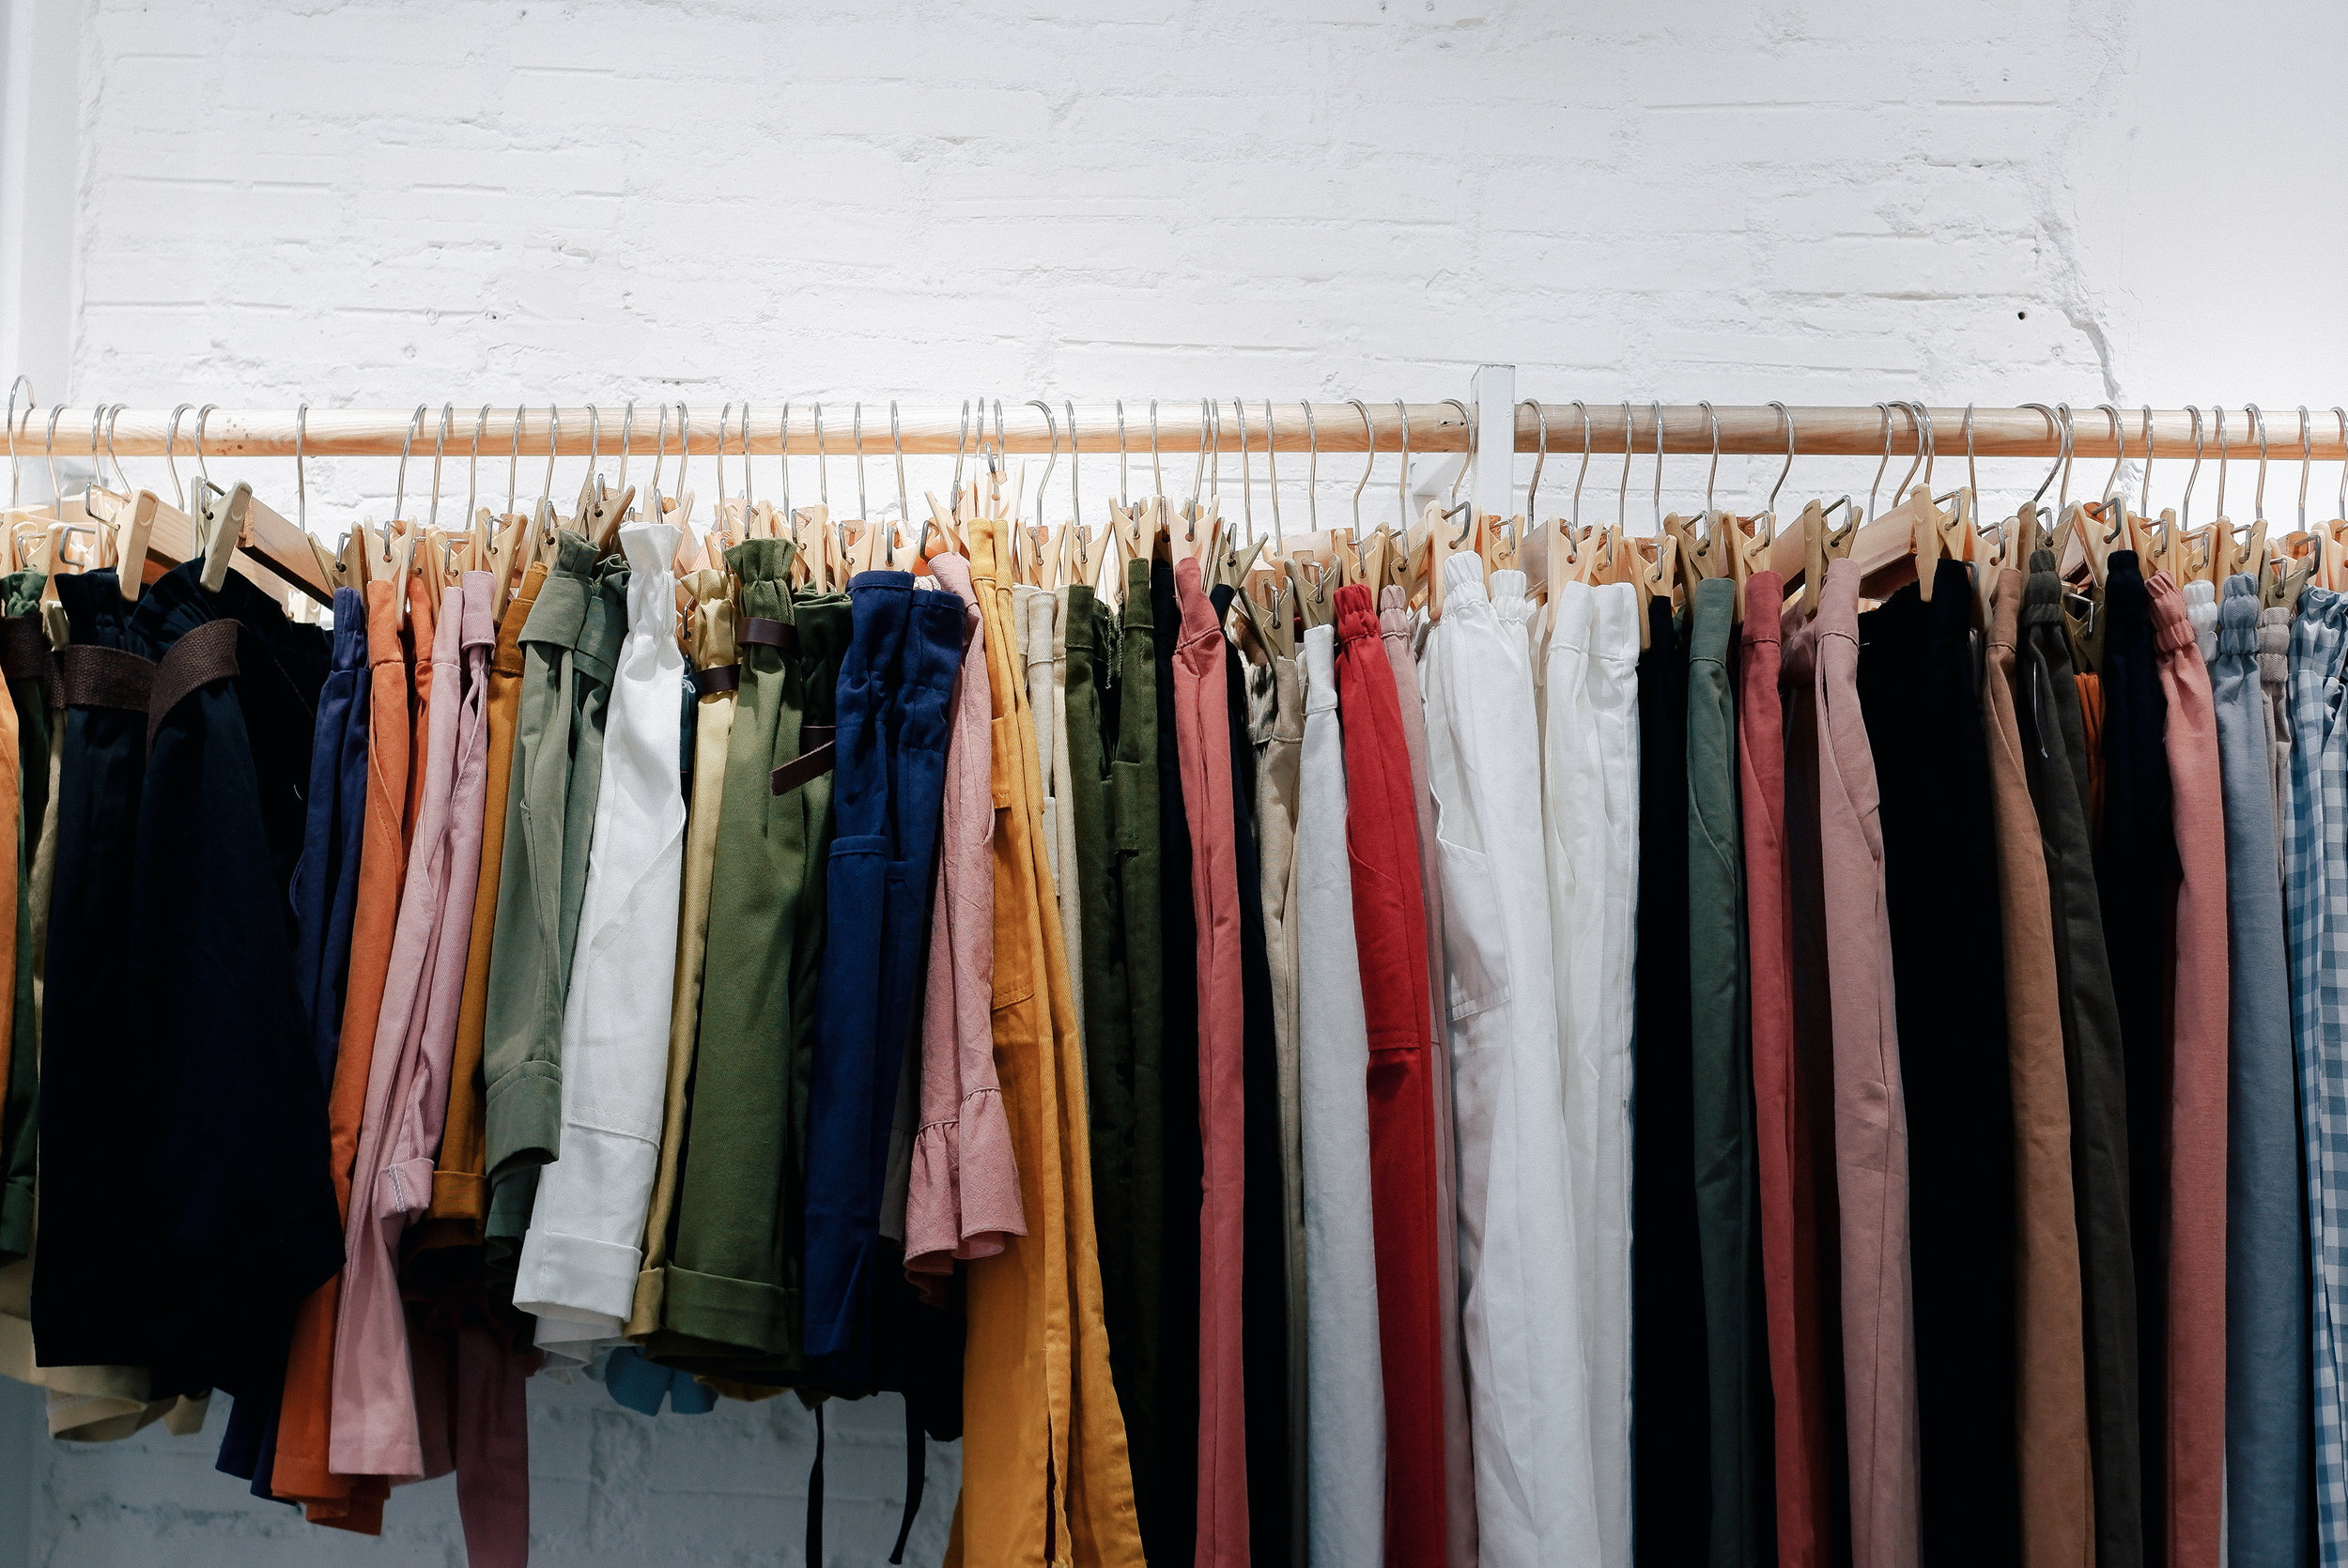 Organise a clothes swap event